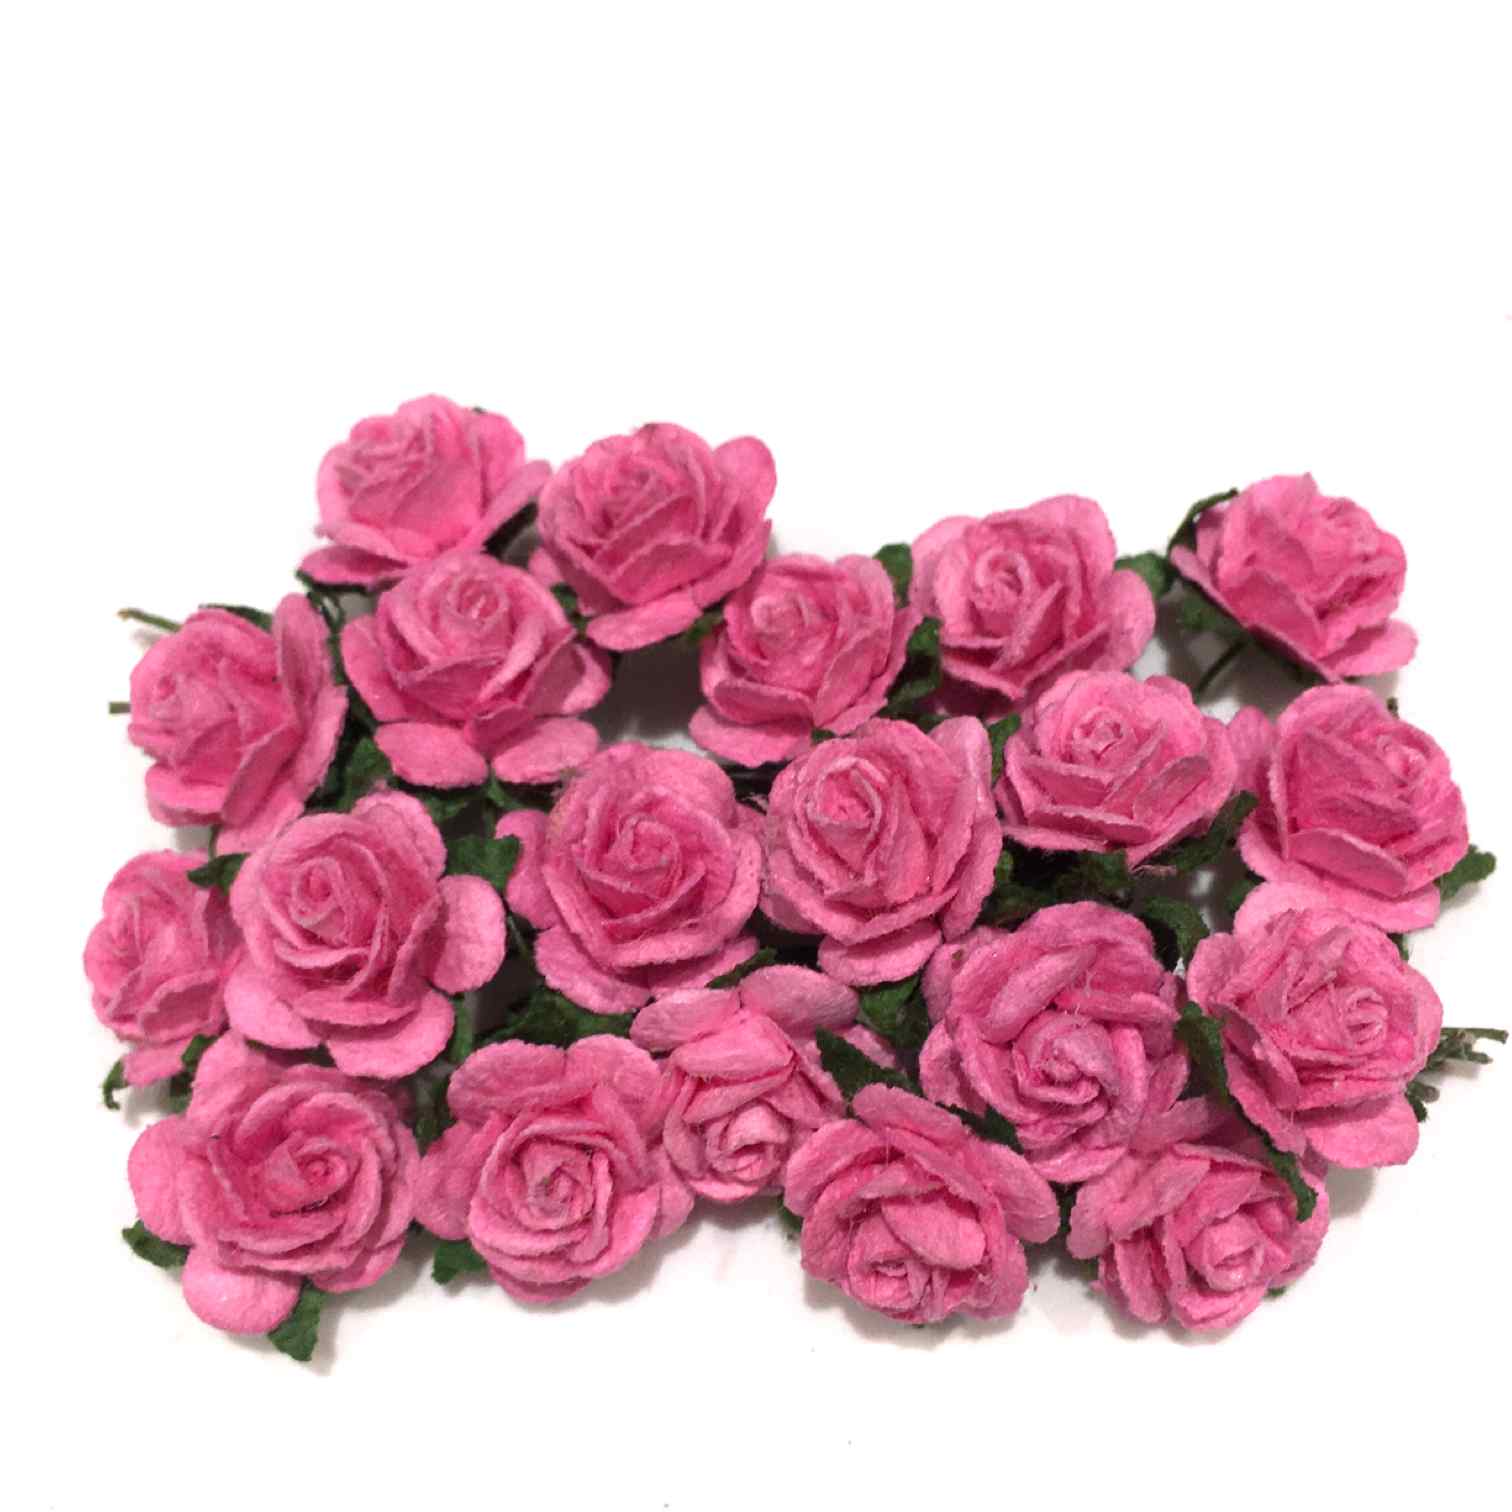 Deep Pink Open Mulberry Paper Roses Or035